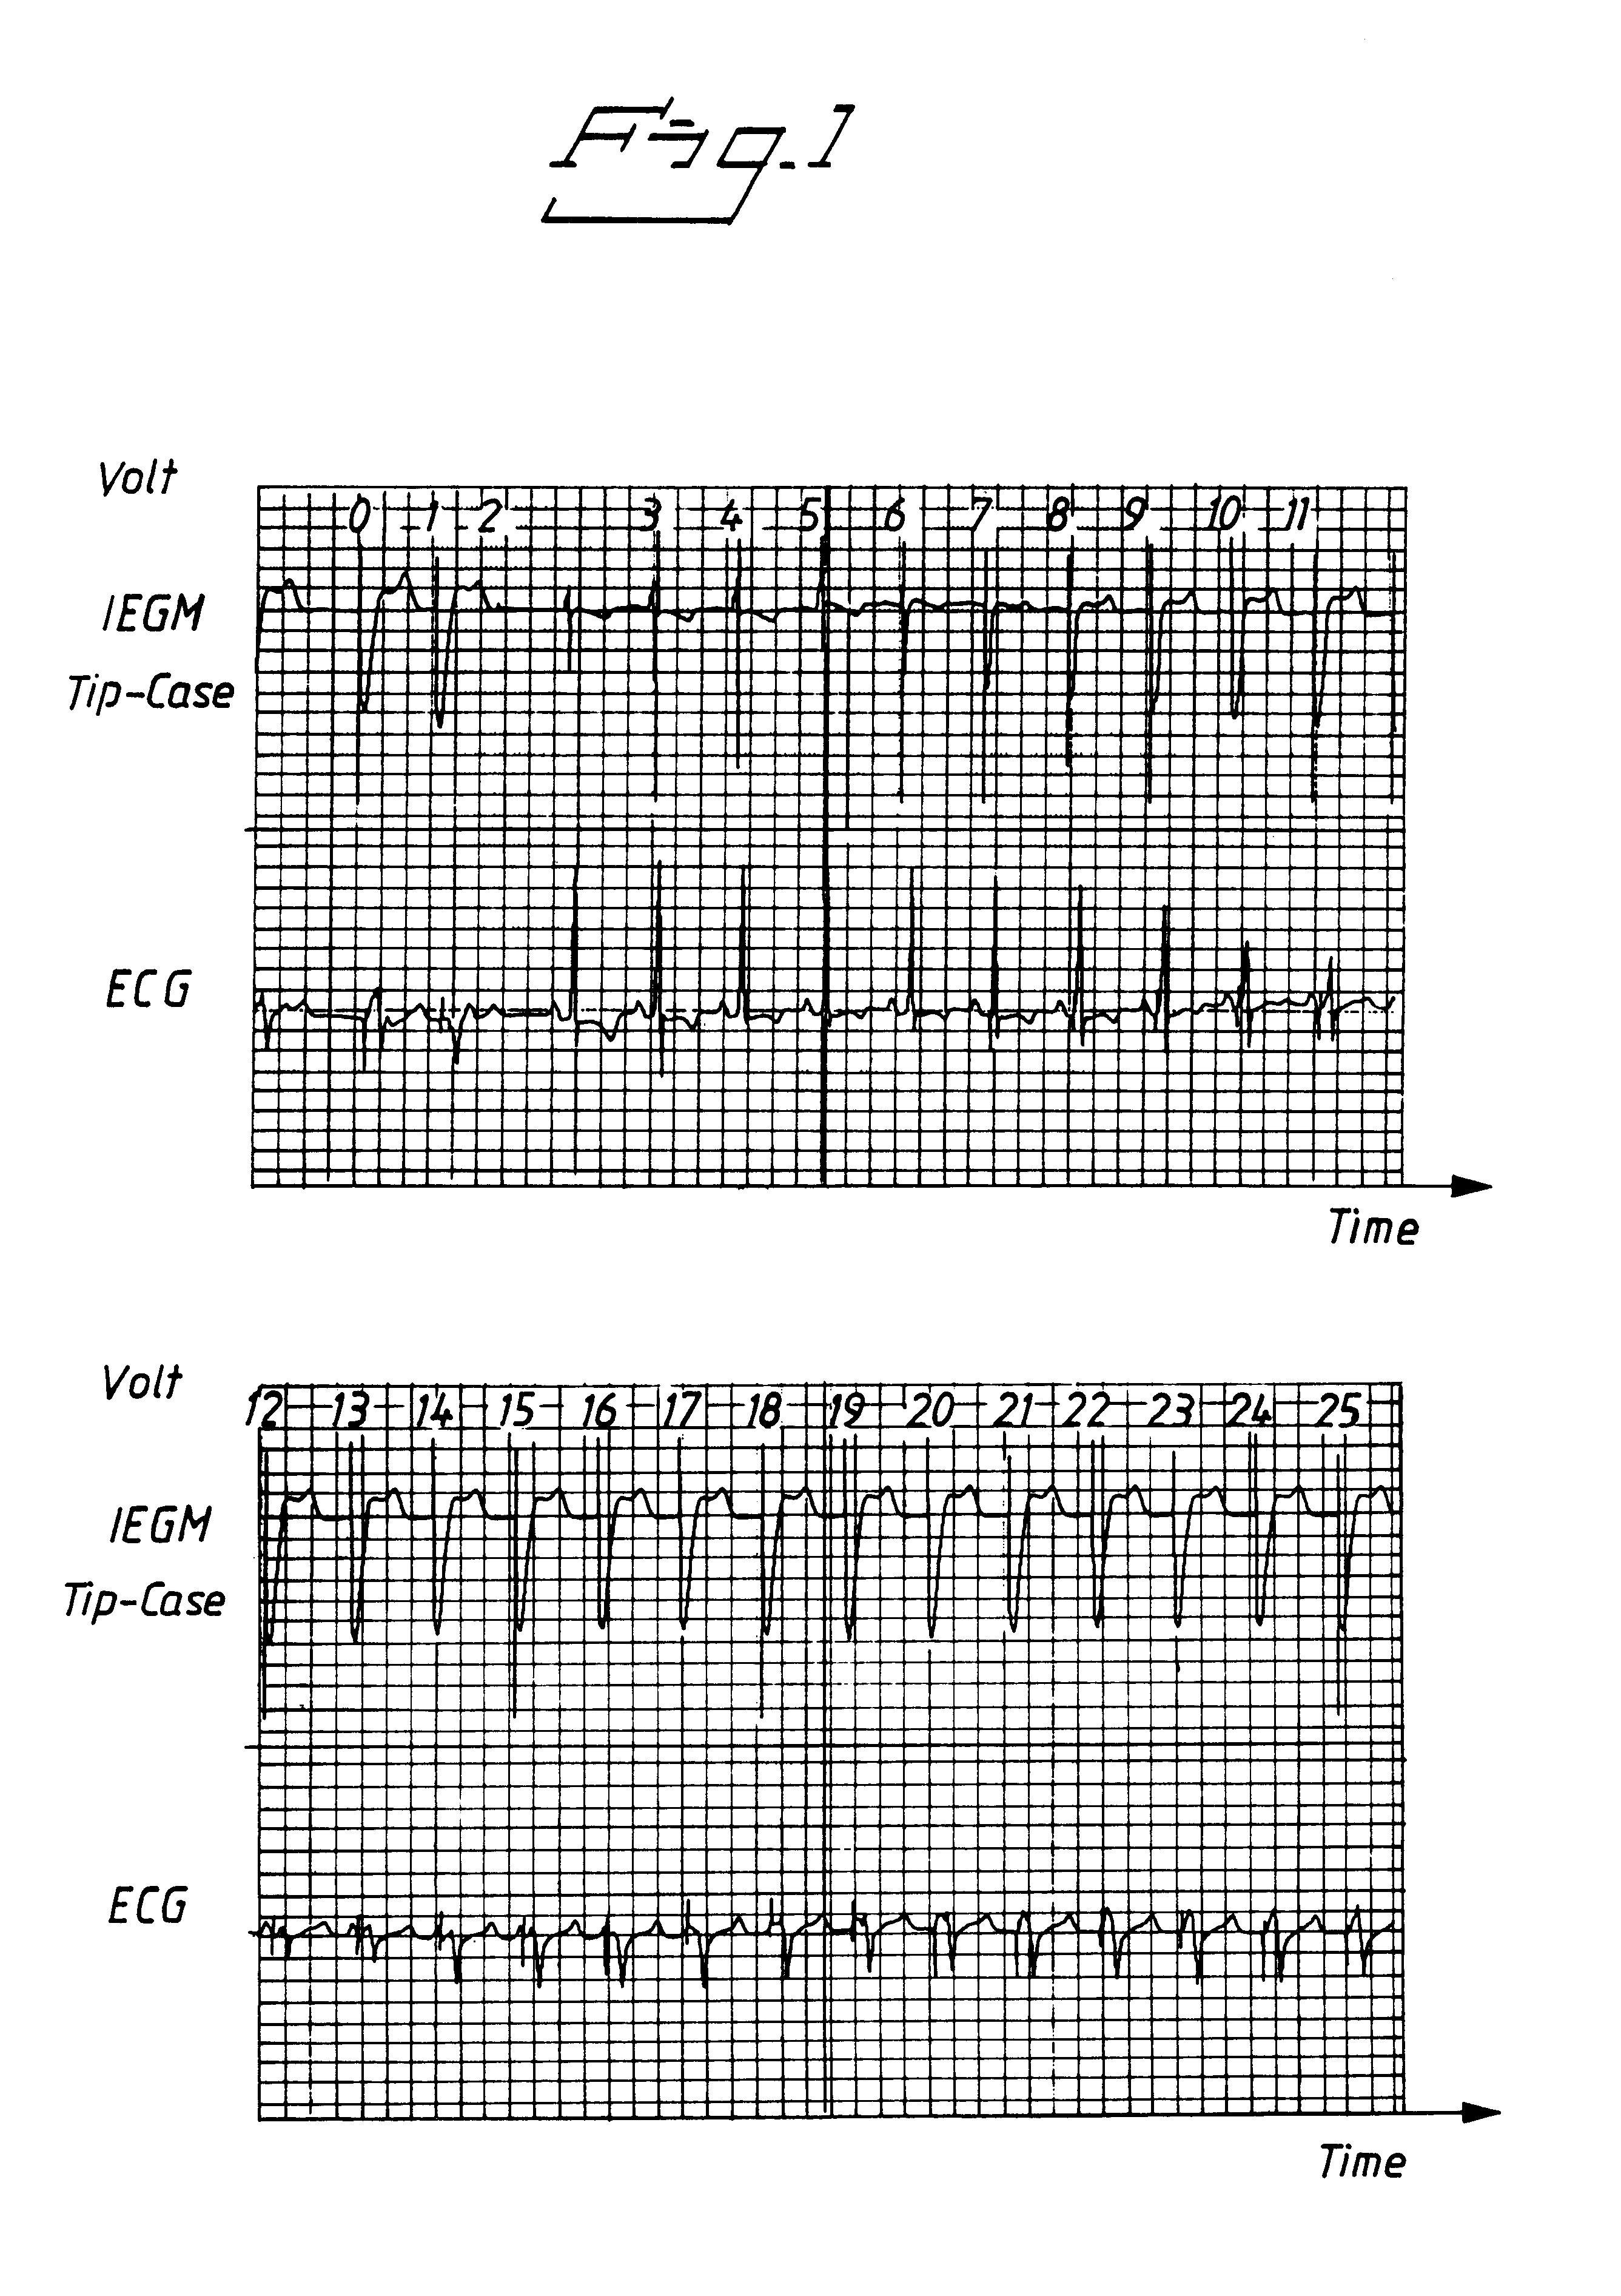 Evoked response detector, averaging the value of the amplitude of the picked-up electrode signal